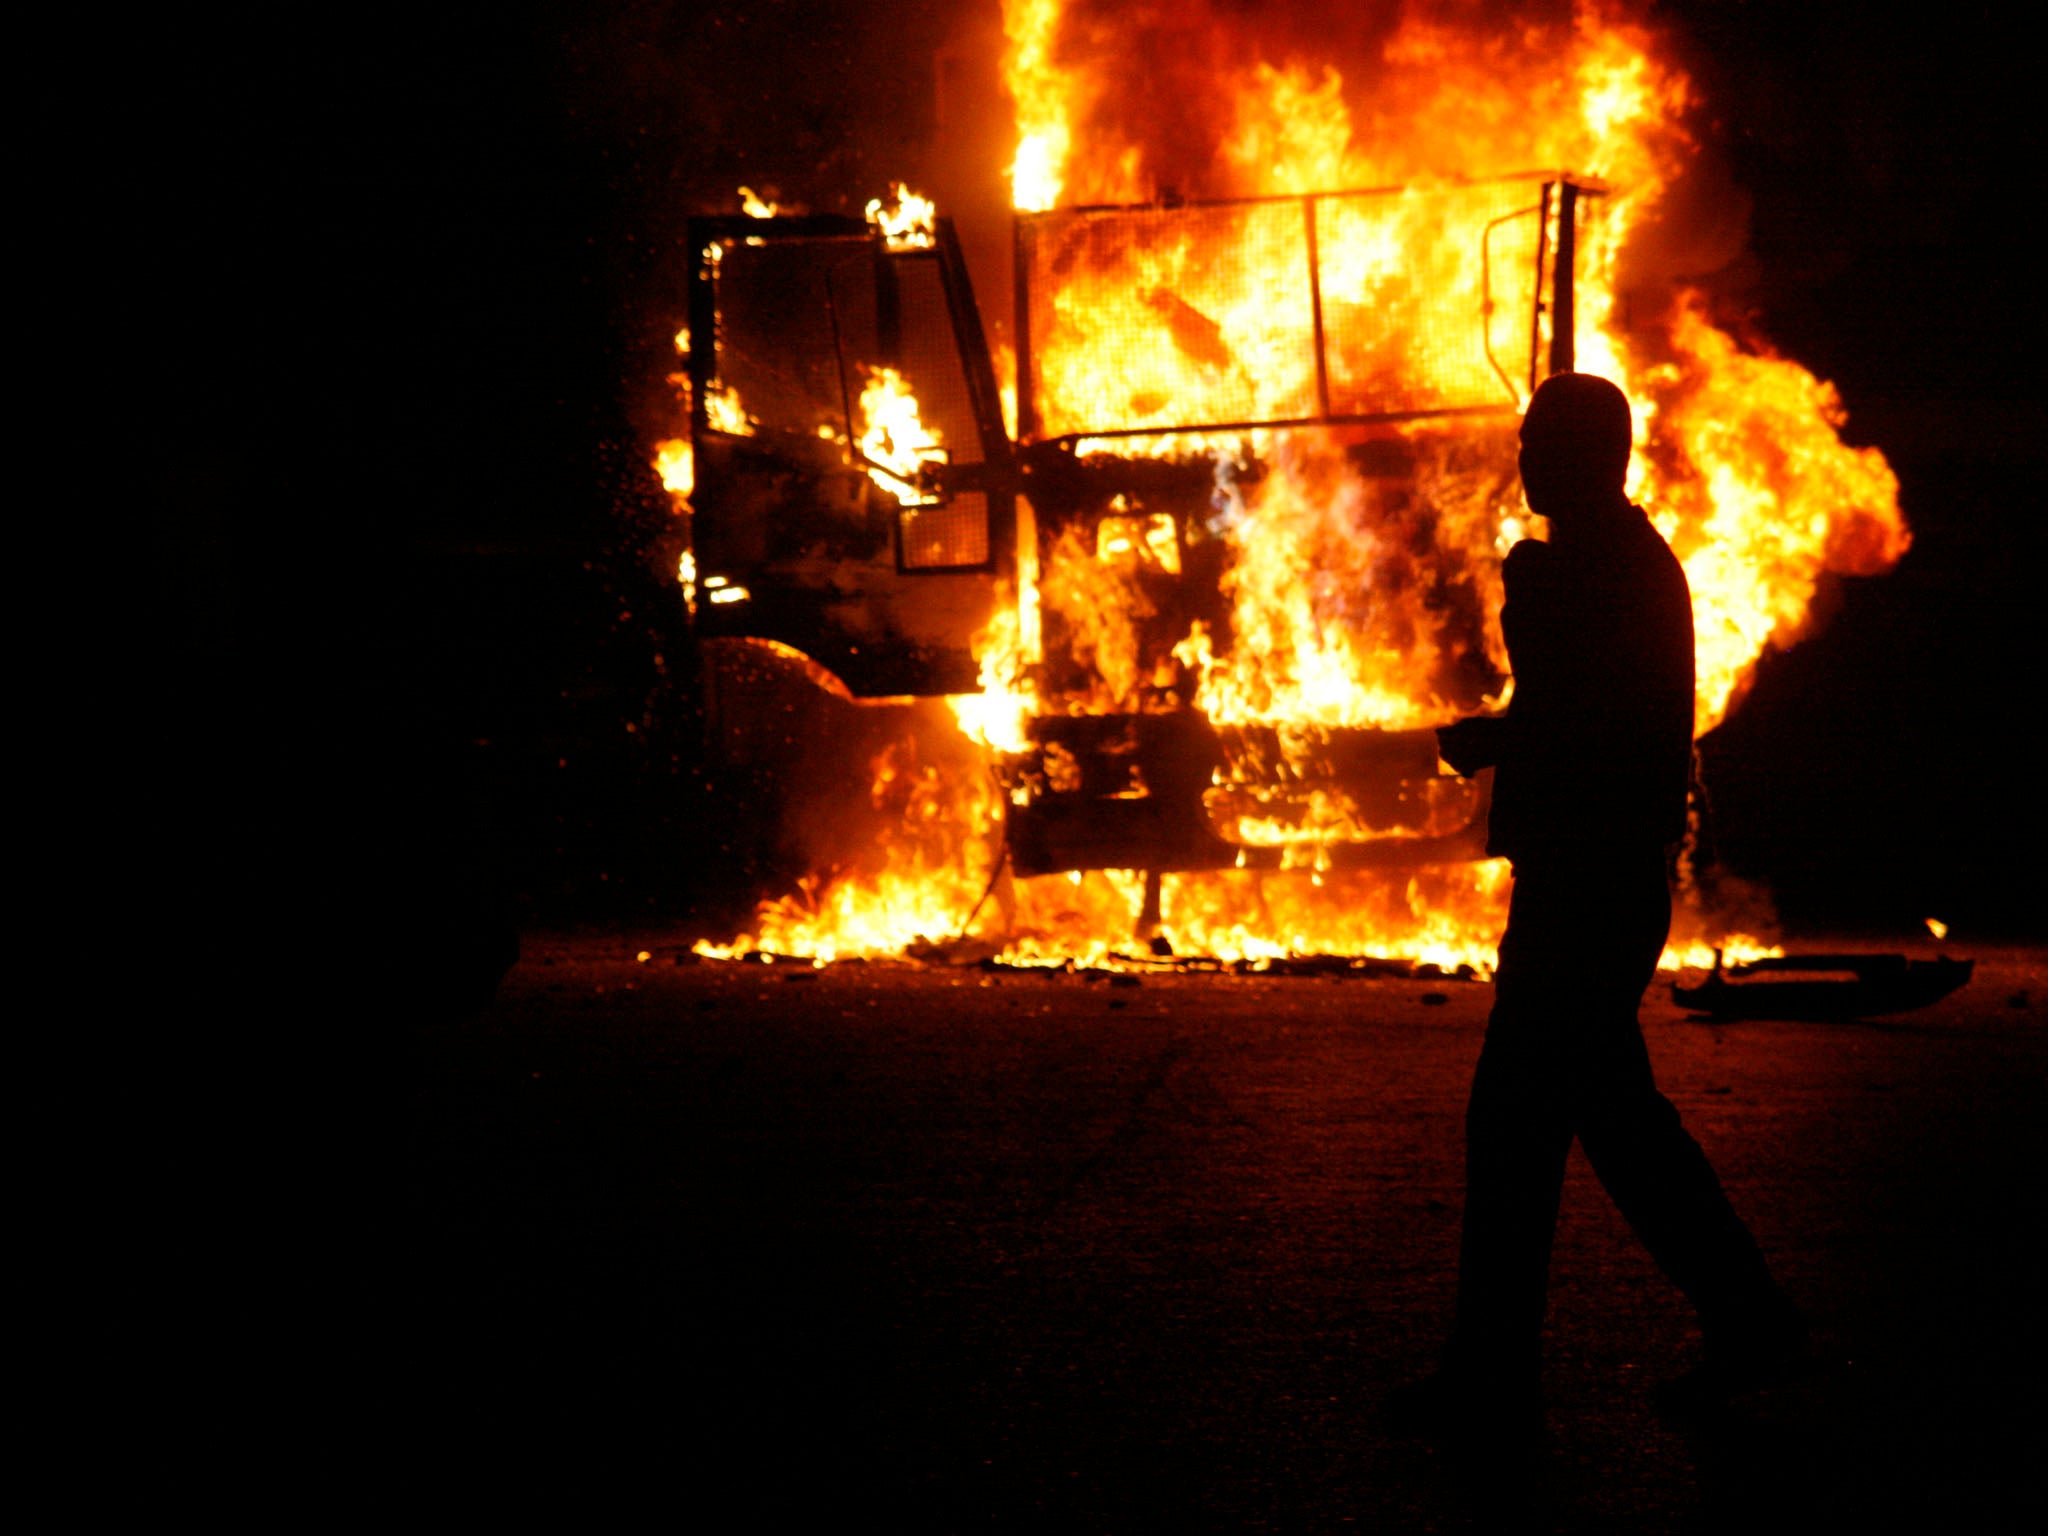 An Egyptian man walks by a burning Egyptian police truck during a demonstration against Egypt's Islamist President Mohamed Morsi on November 23, 2012 in Cairo. Morsi insisted that Egypt is on the path to 'freedom and democracy' after granting himself swee